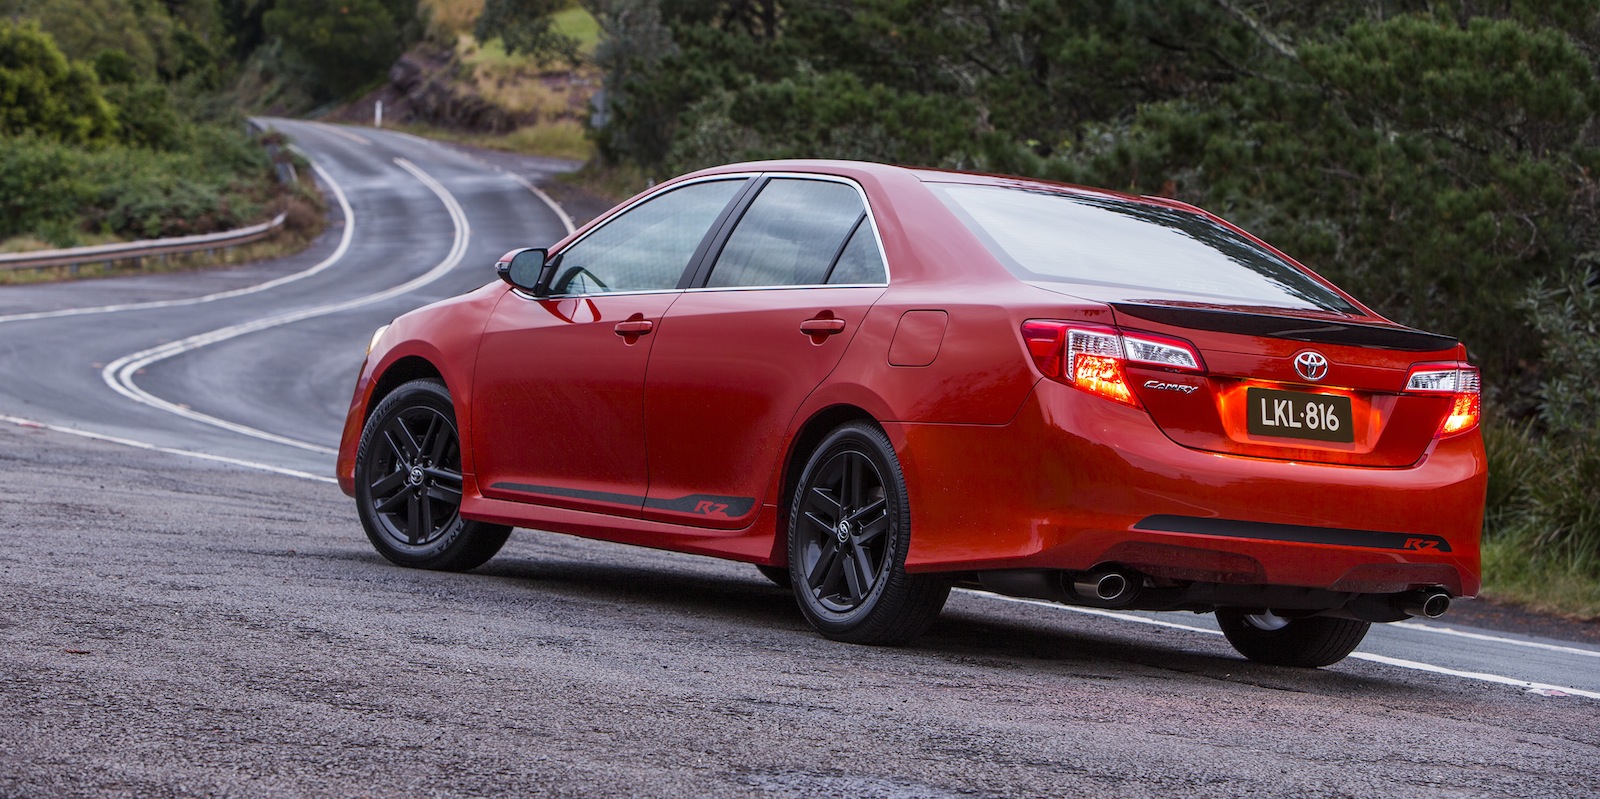 Toyota Camry RZ : Sporty special edition from $31,990 - photos | CarAdvice
